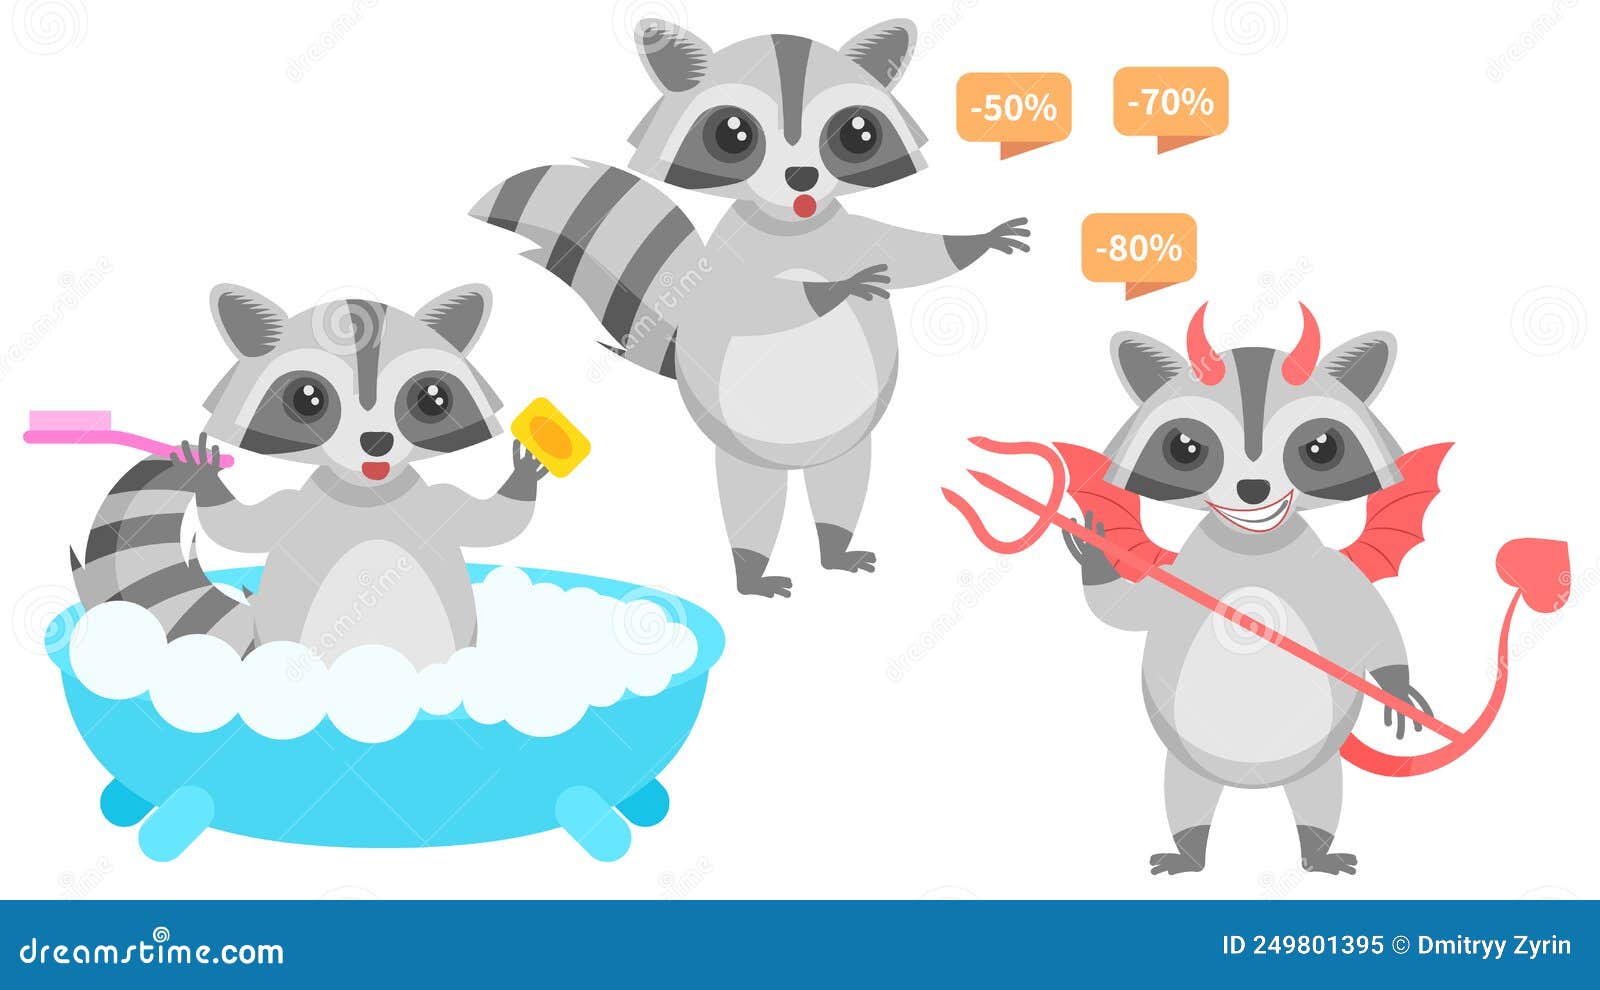 animal raccon washes in the bath, devil with horns and trident, surprised by the discounts 